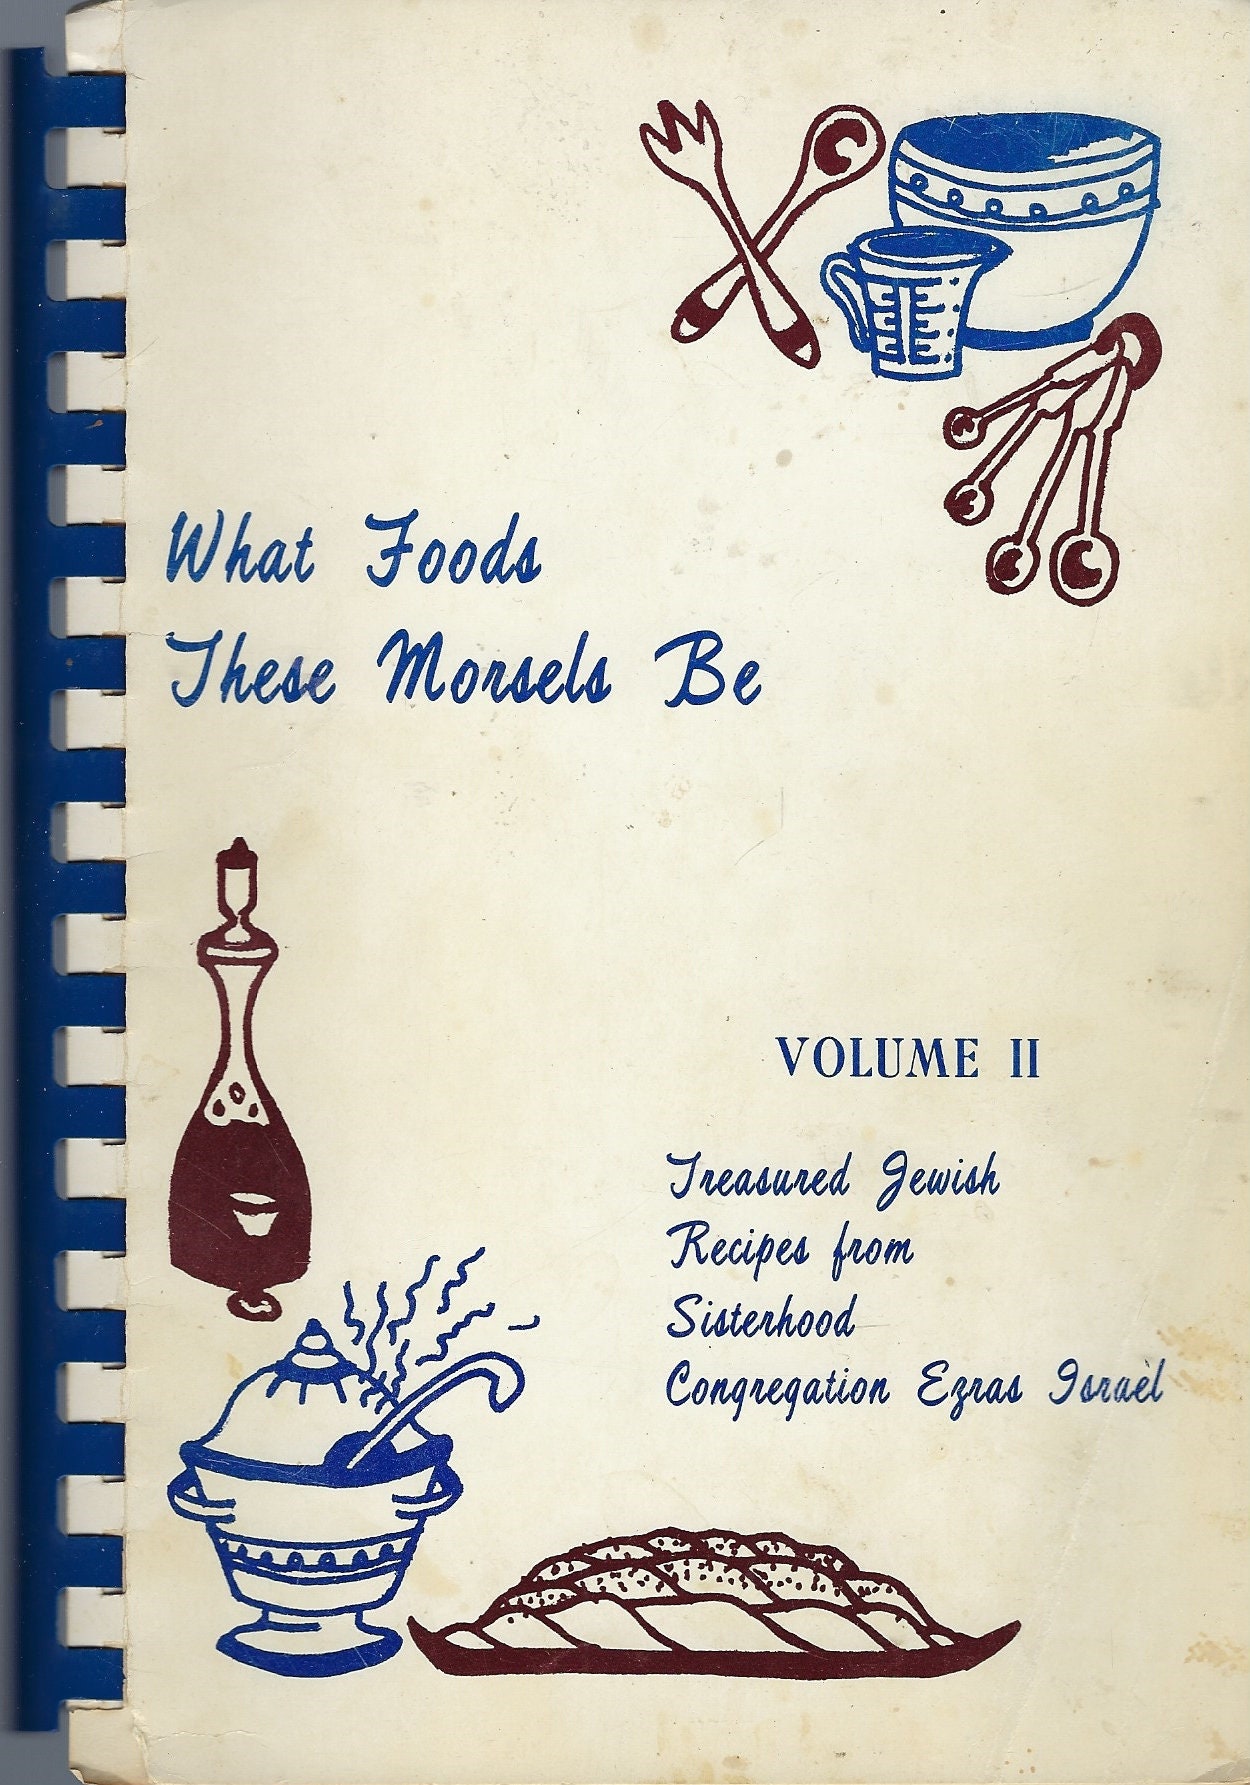 Chicago Illinois Vintage Congregation Azras Israel What Foods These Morsels Be Ethnic Jewish Cookbook Il Community Passover Recipes & More